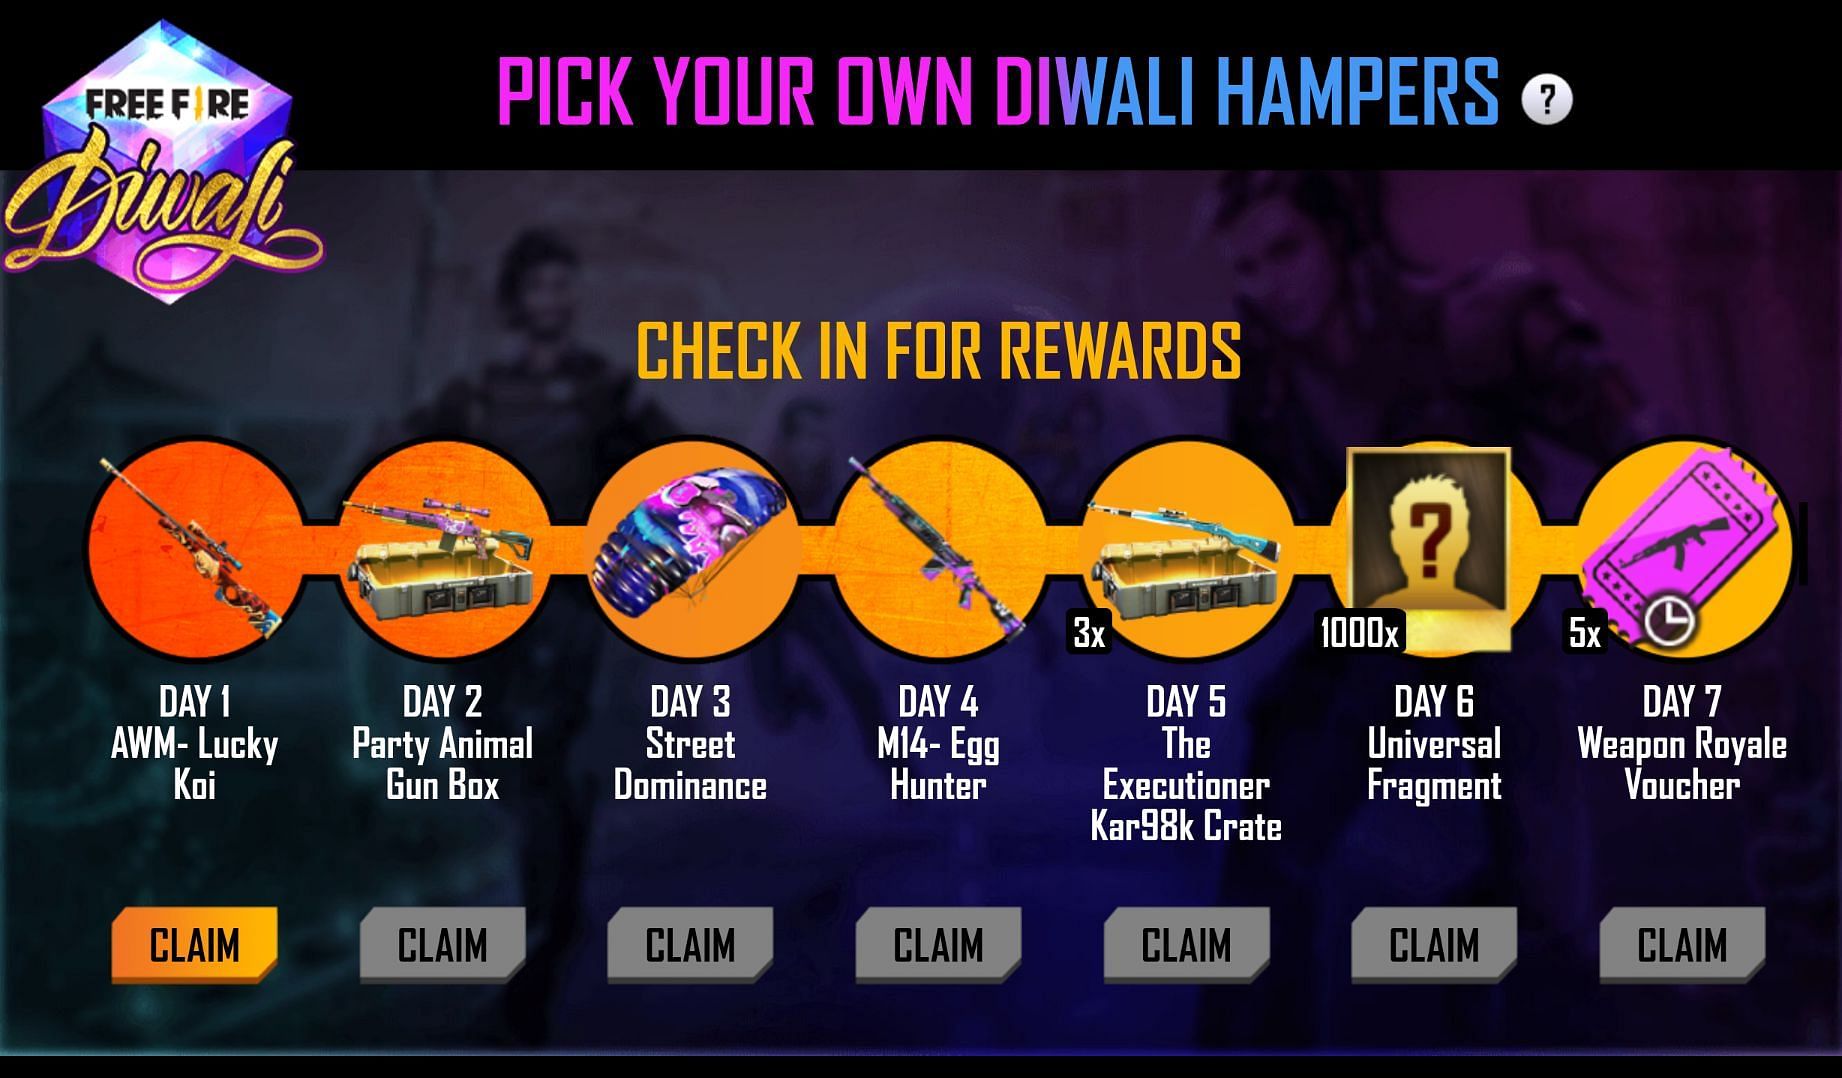 Log in daily to attain a free reward (Image via Free Fire)